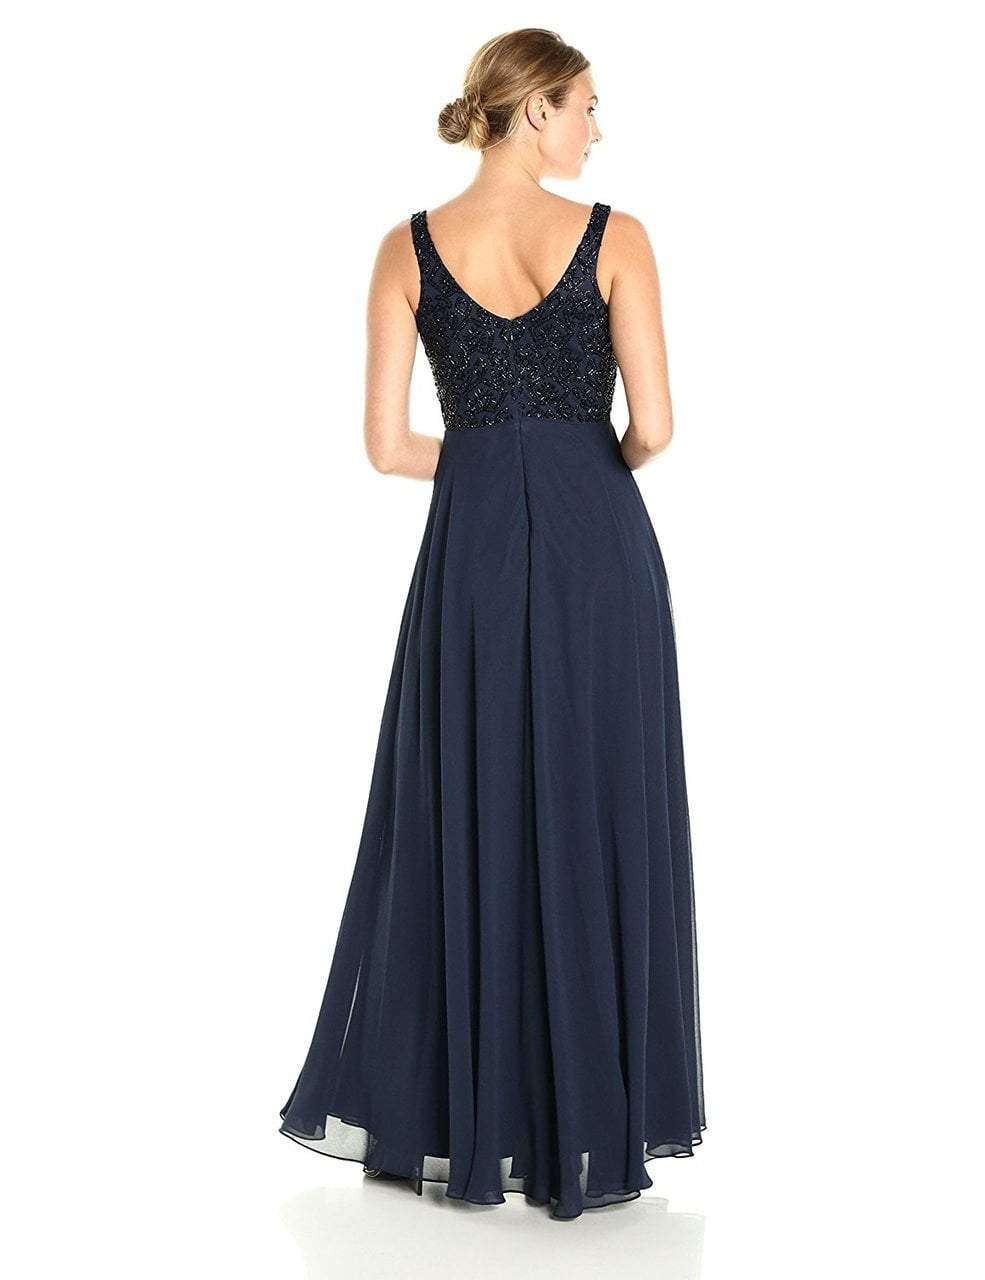 Aidan Mattox - MD1E201185 Embellished Caped Scoop Neck A-Line Gown in Blue and Black